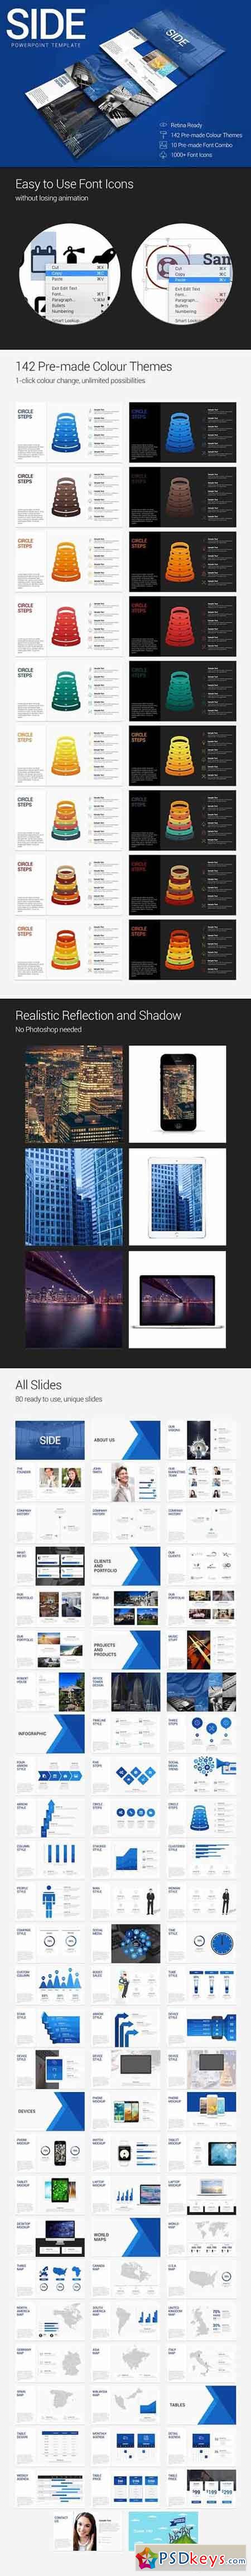 SIDE - PowerPoint Template 668026